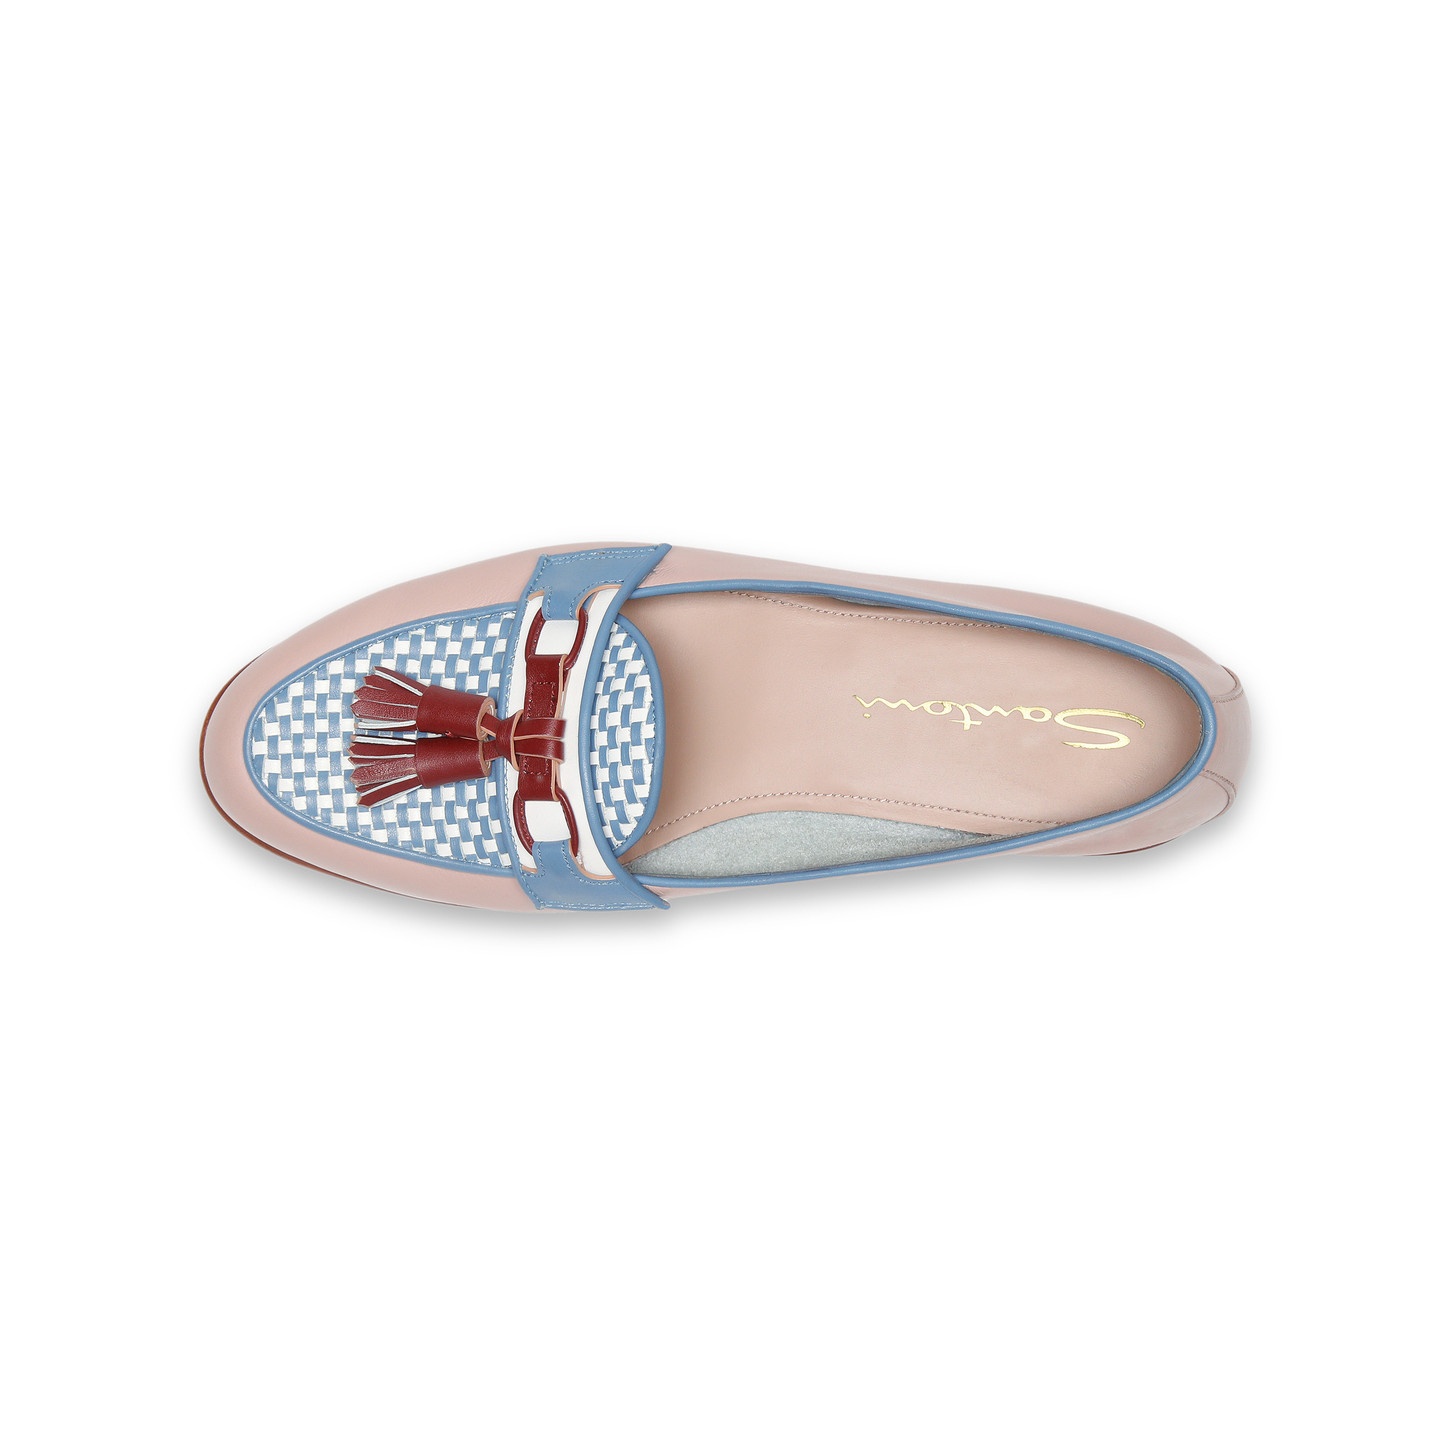 Women's pink and light blue leather Andrea tassel loafer - 5